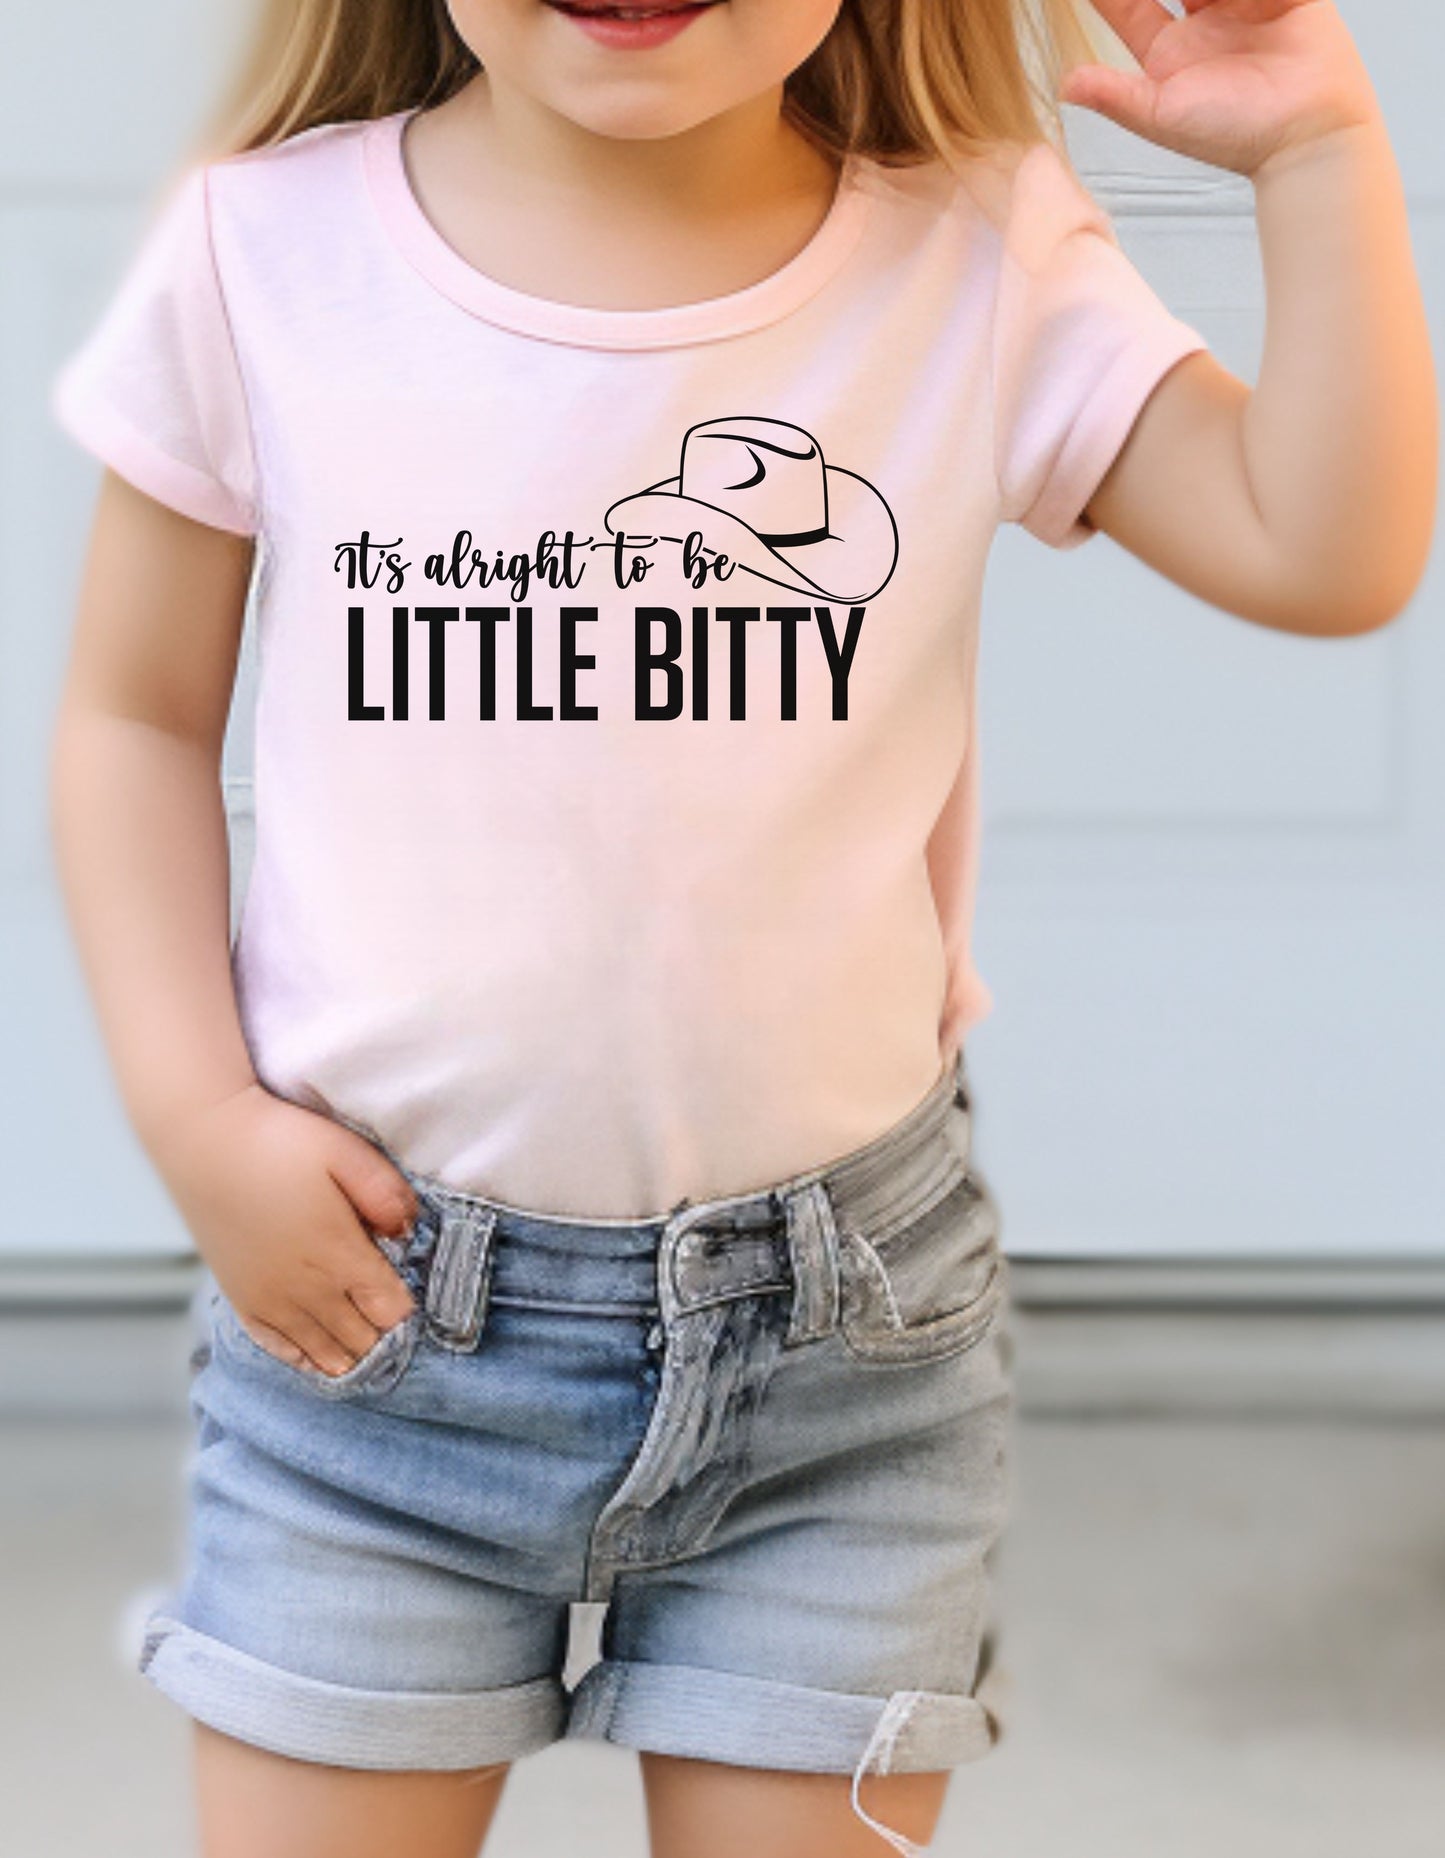 IT'S ALRIGHT TO BE LITTLE BITTY TEE